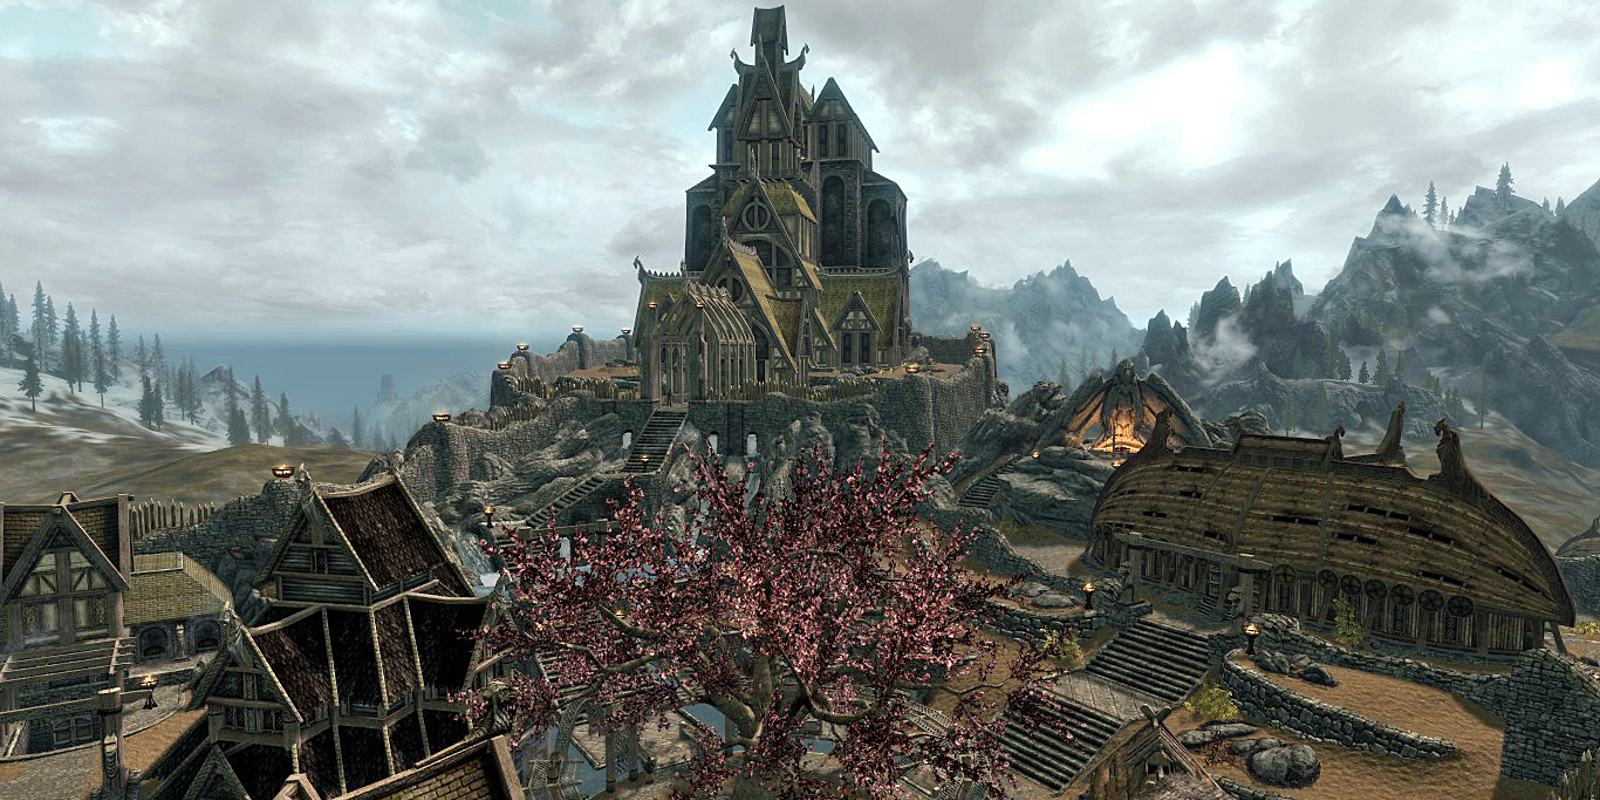 A photo of the town of Whiterun. Dragonsreach and the tree in the center of town can be seen